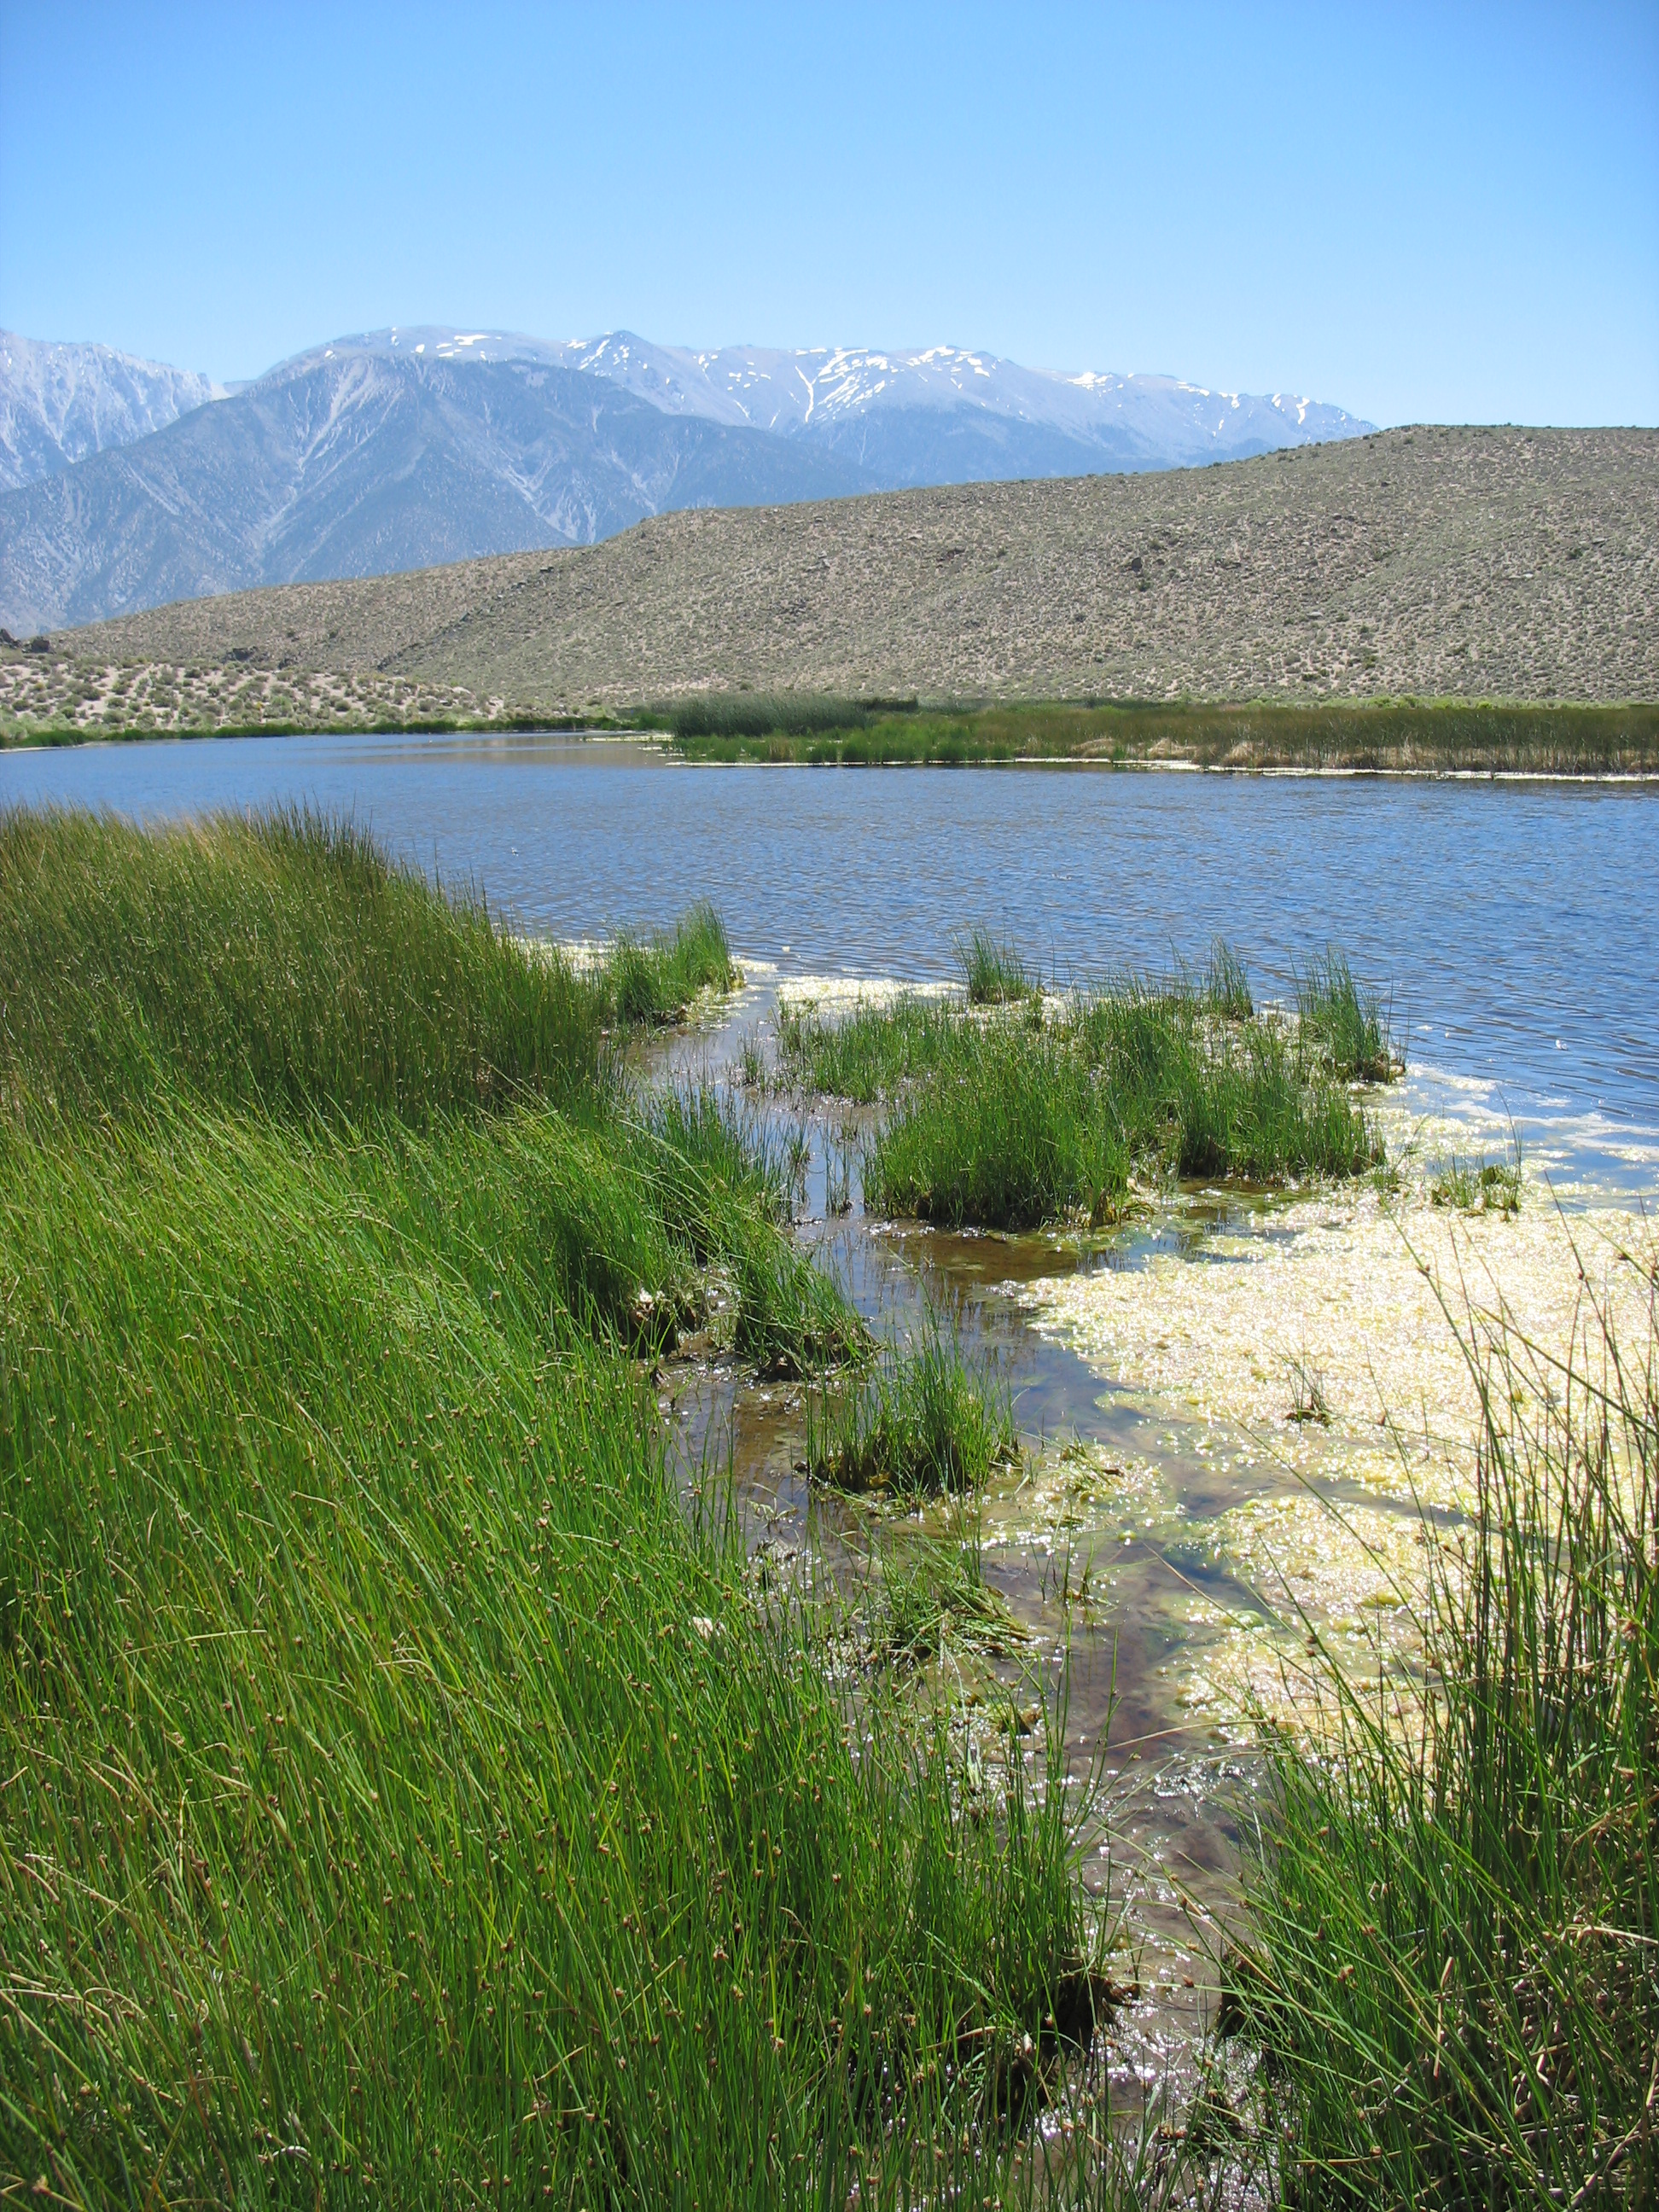 Pond with grass and mountains